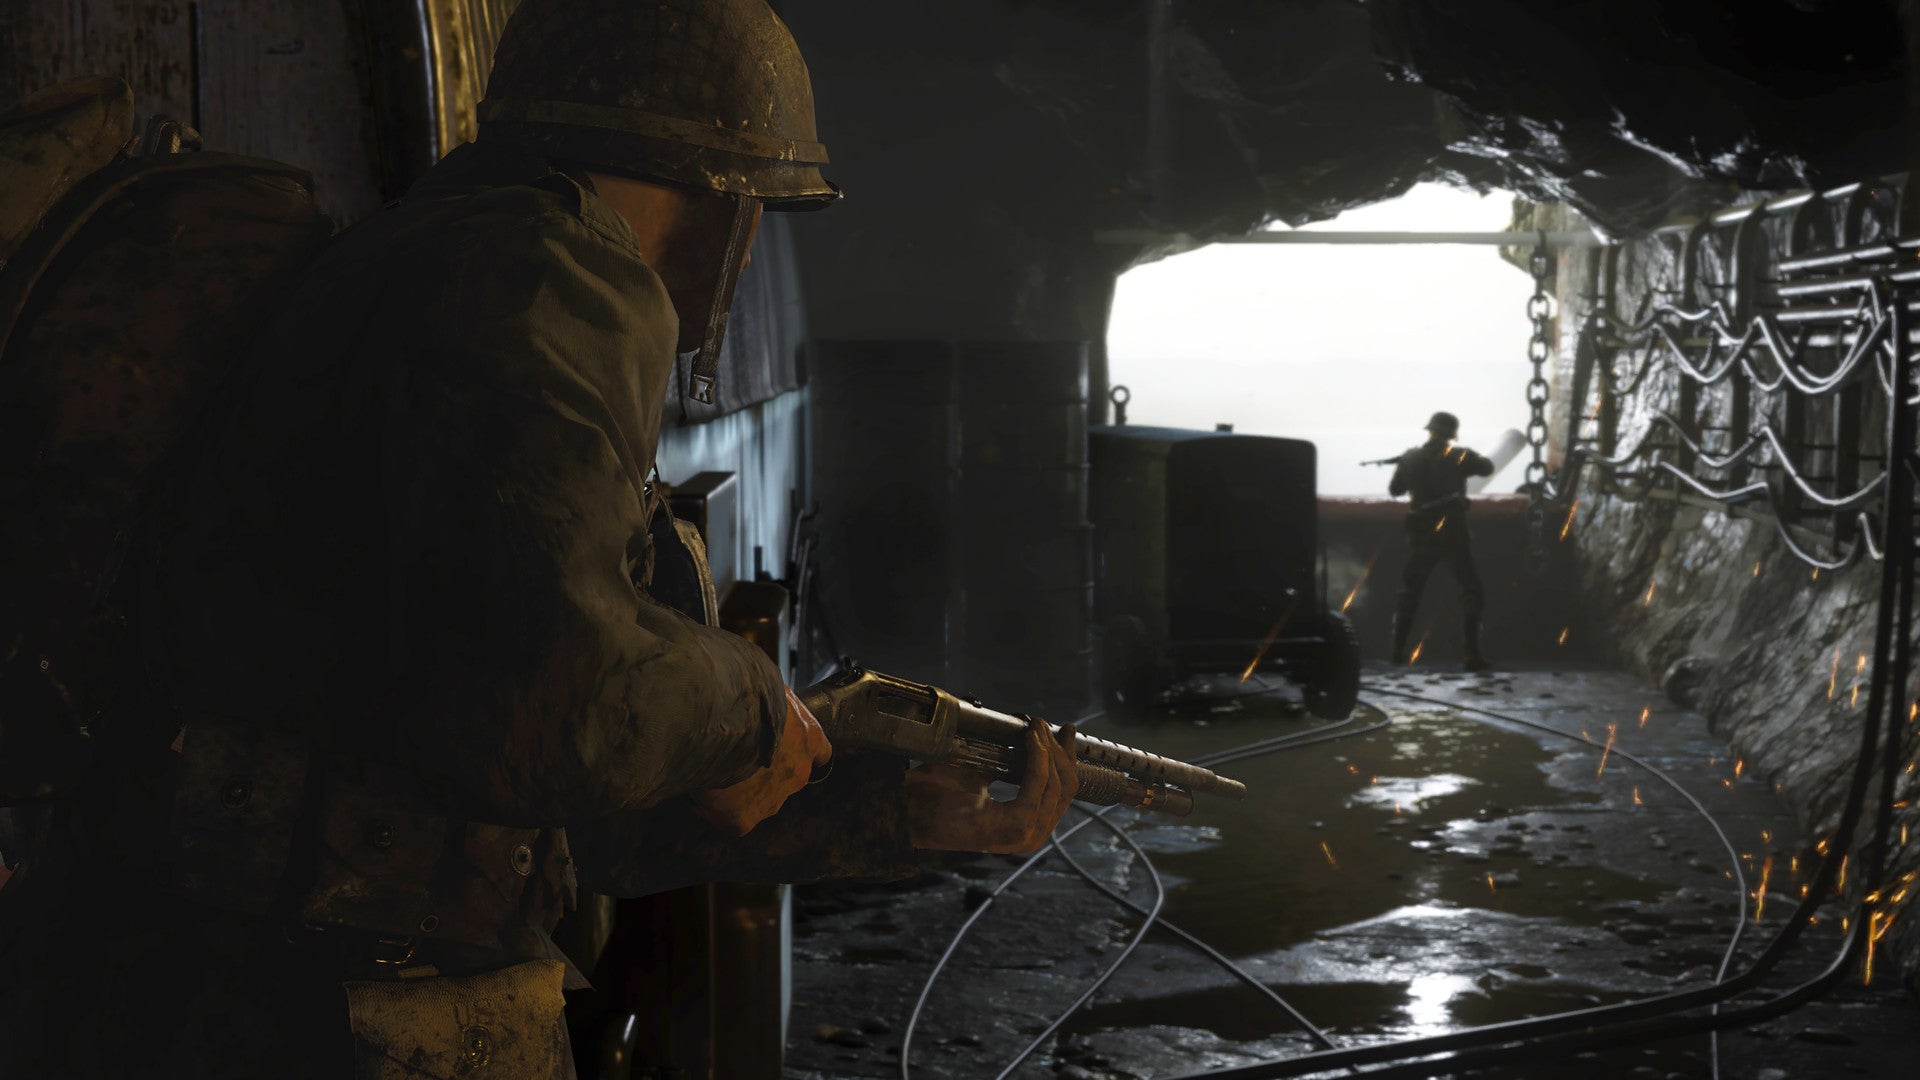 Image for Today's Call of Duty: WW2 patch screwed things up big time [Update]